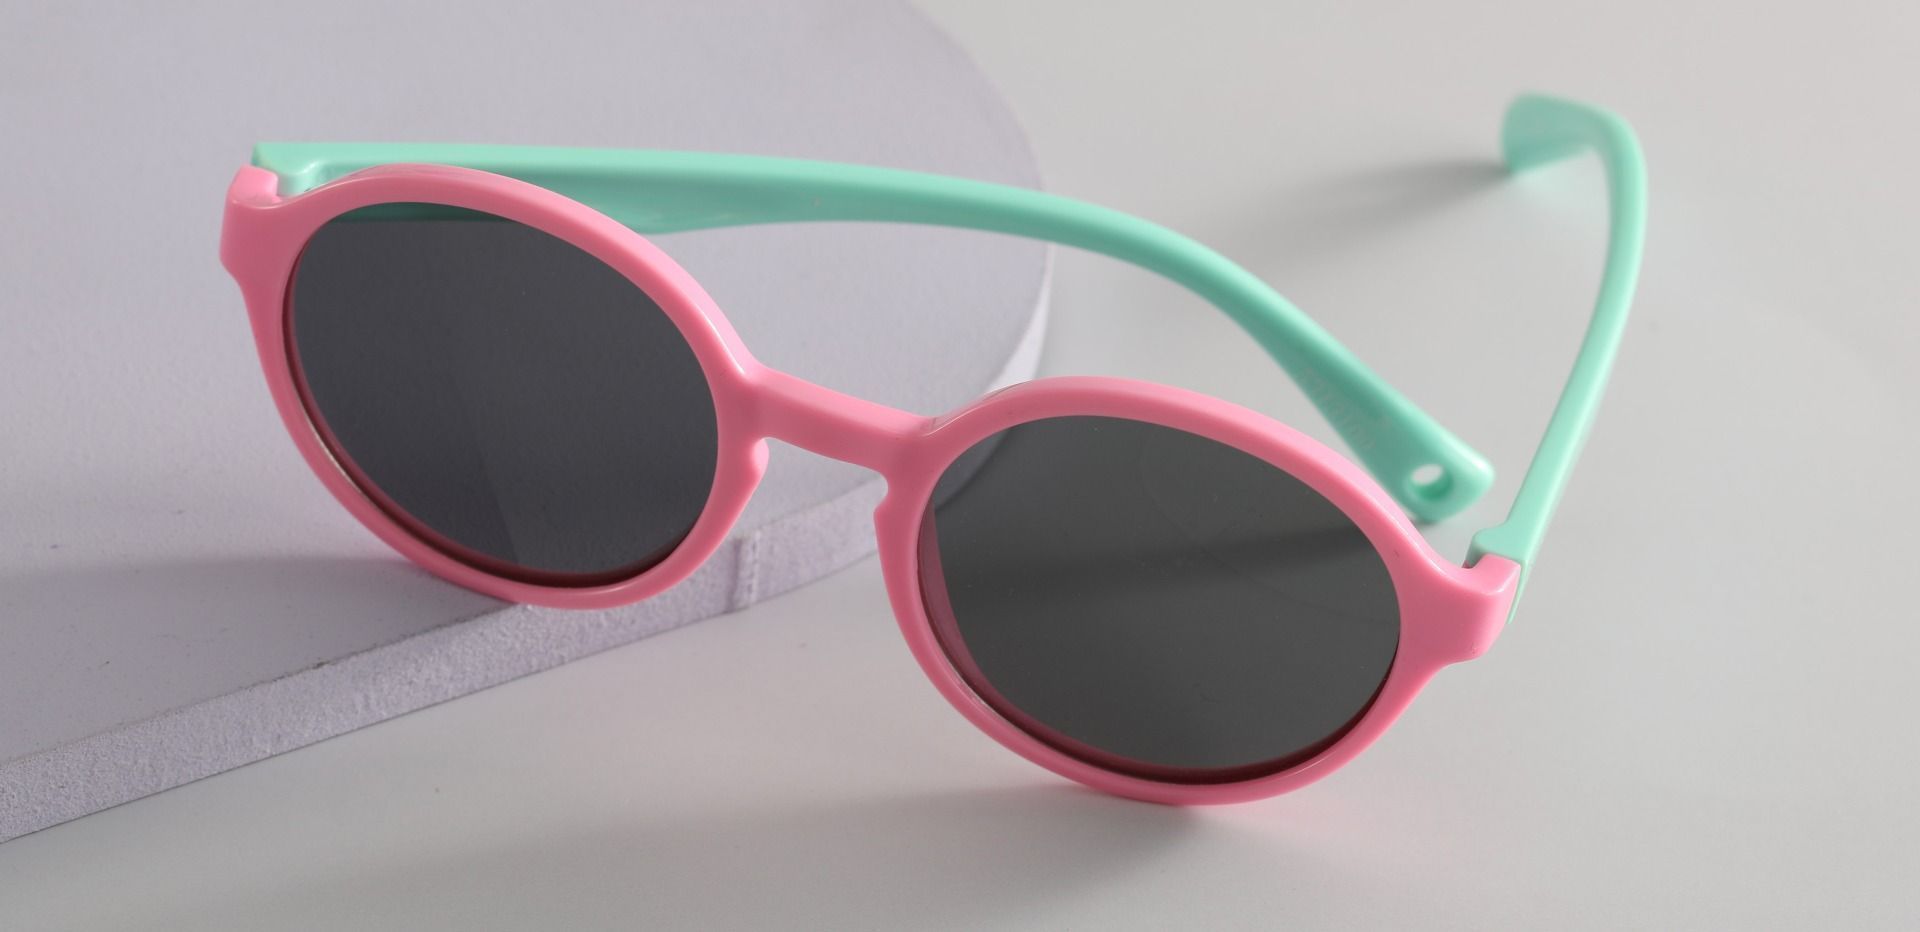 Cotton Candy Round Single Vision Sunglasses - Pink Frame With Gray Lenses